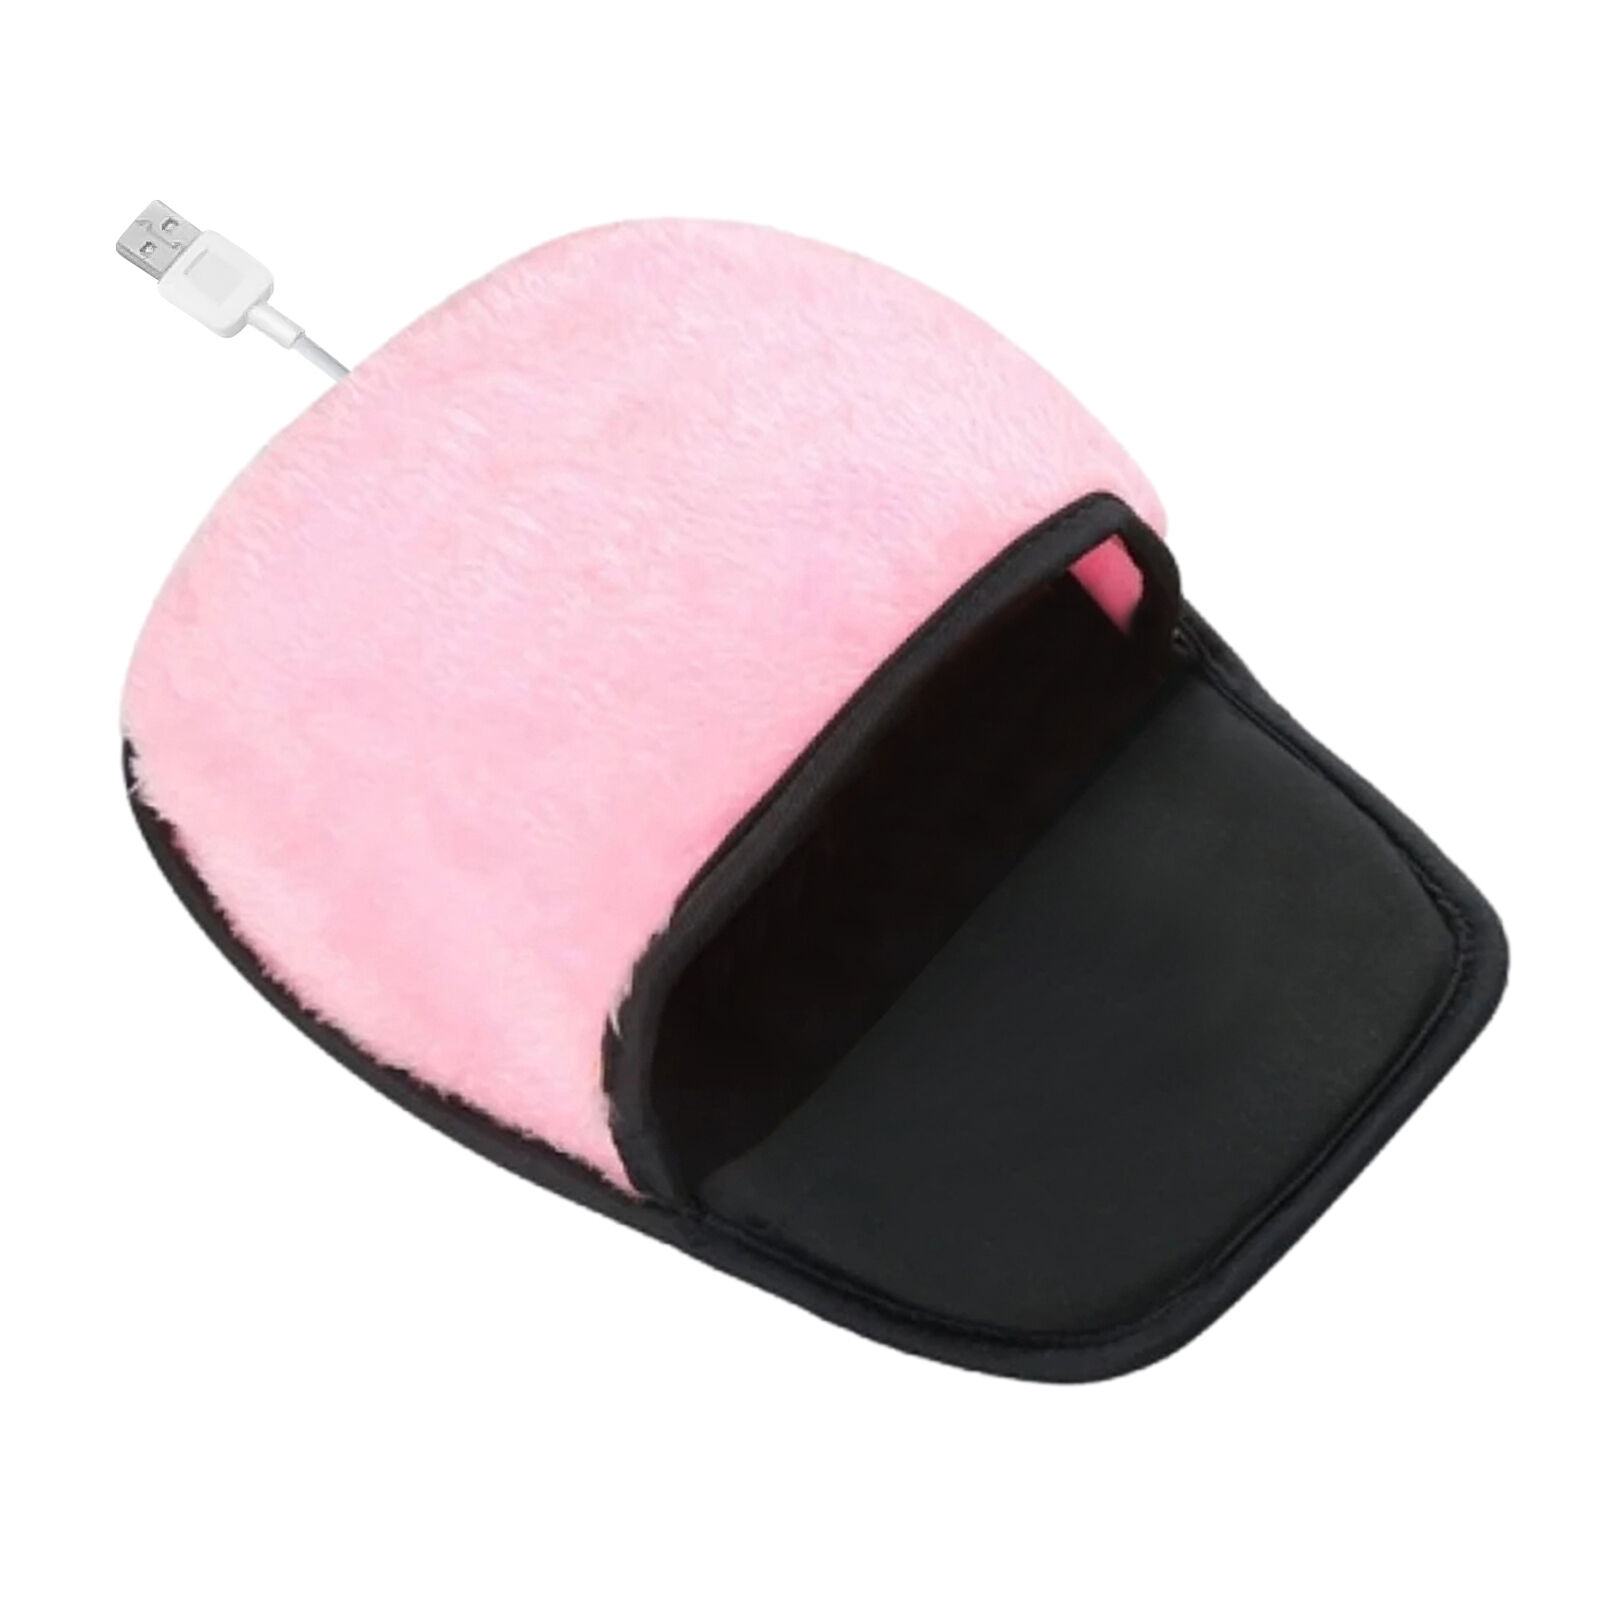 Hand Warmer Mouse Pad USB Heated Mousepad Electric Hand Warmer for Winter Desk